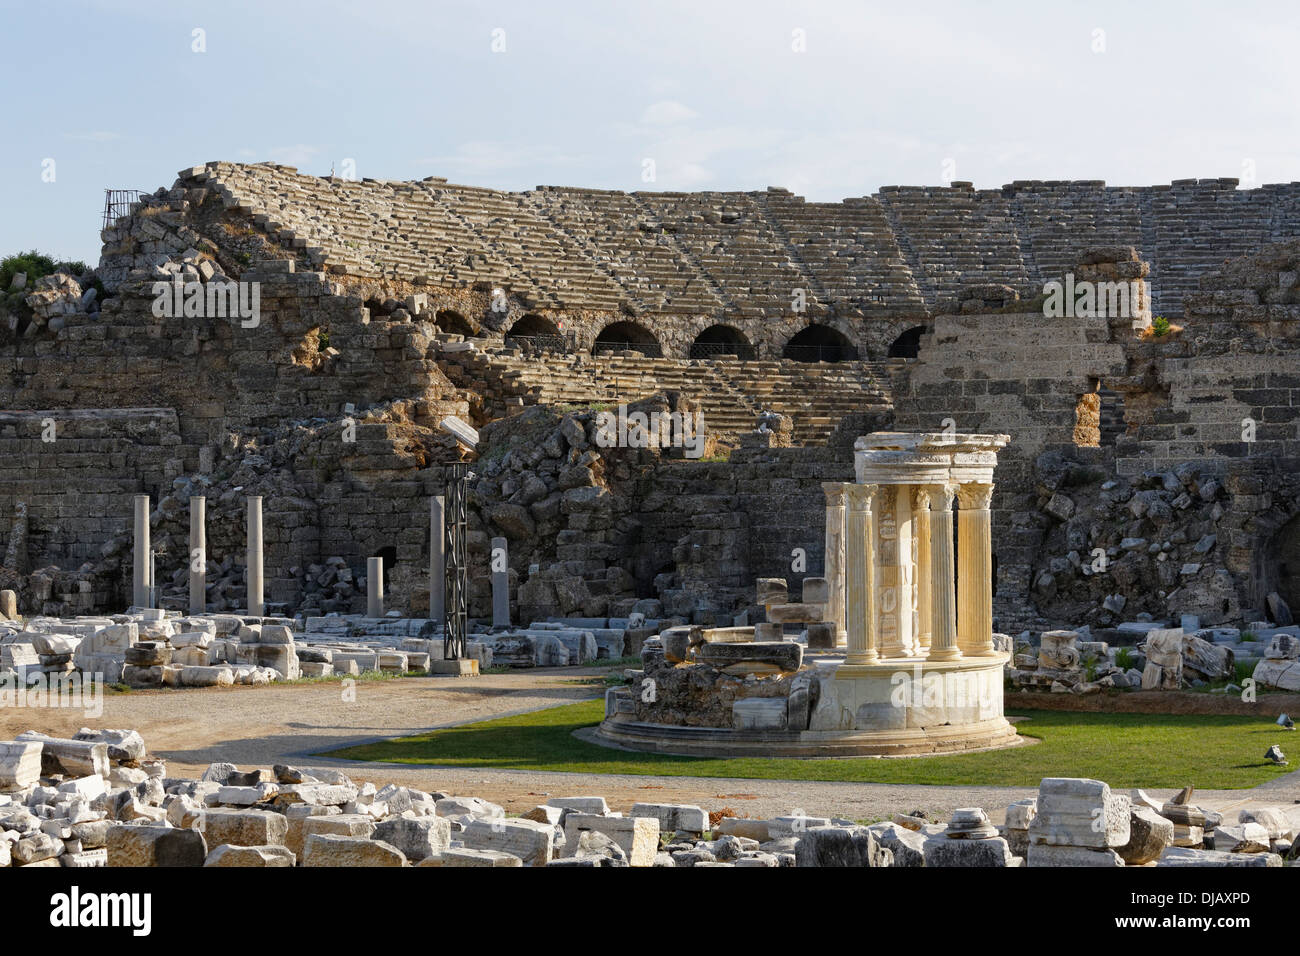 Temple of Tyche, agora and theatre, ancient city of Side, Pamphylia, Antalya Province, Turkey Stock Photo